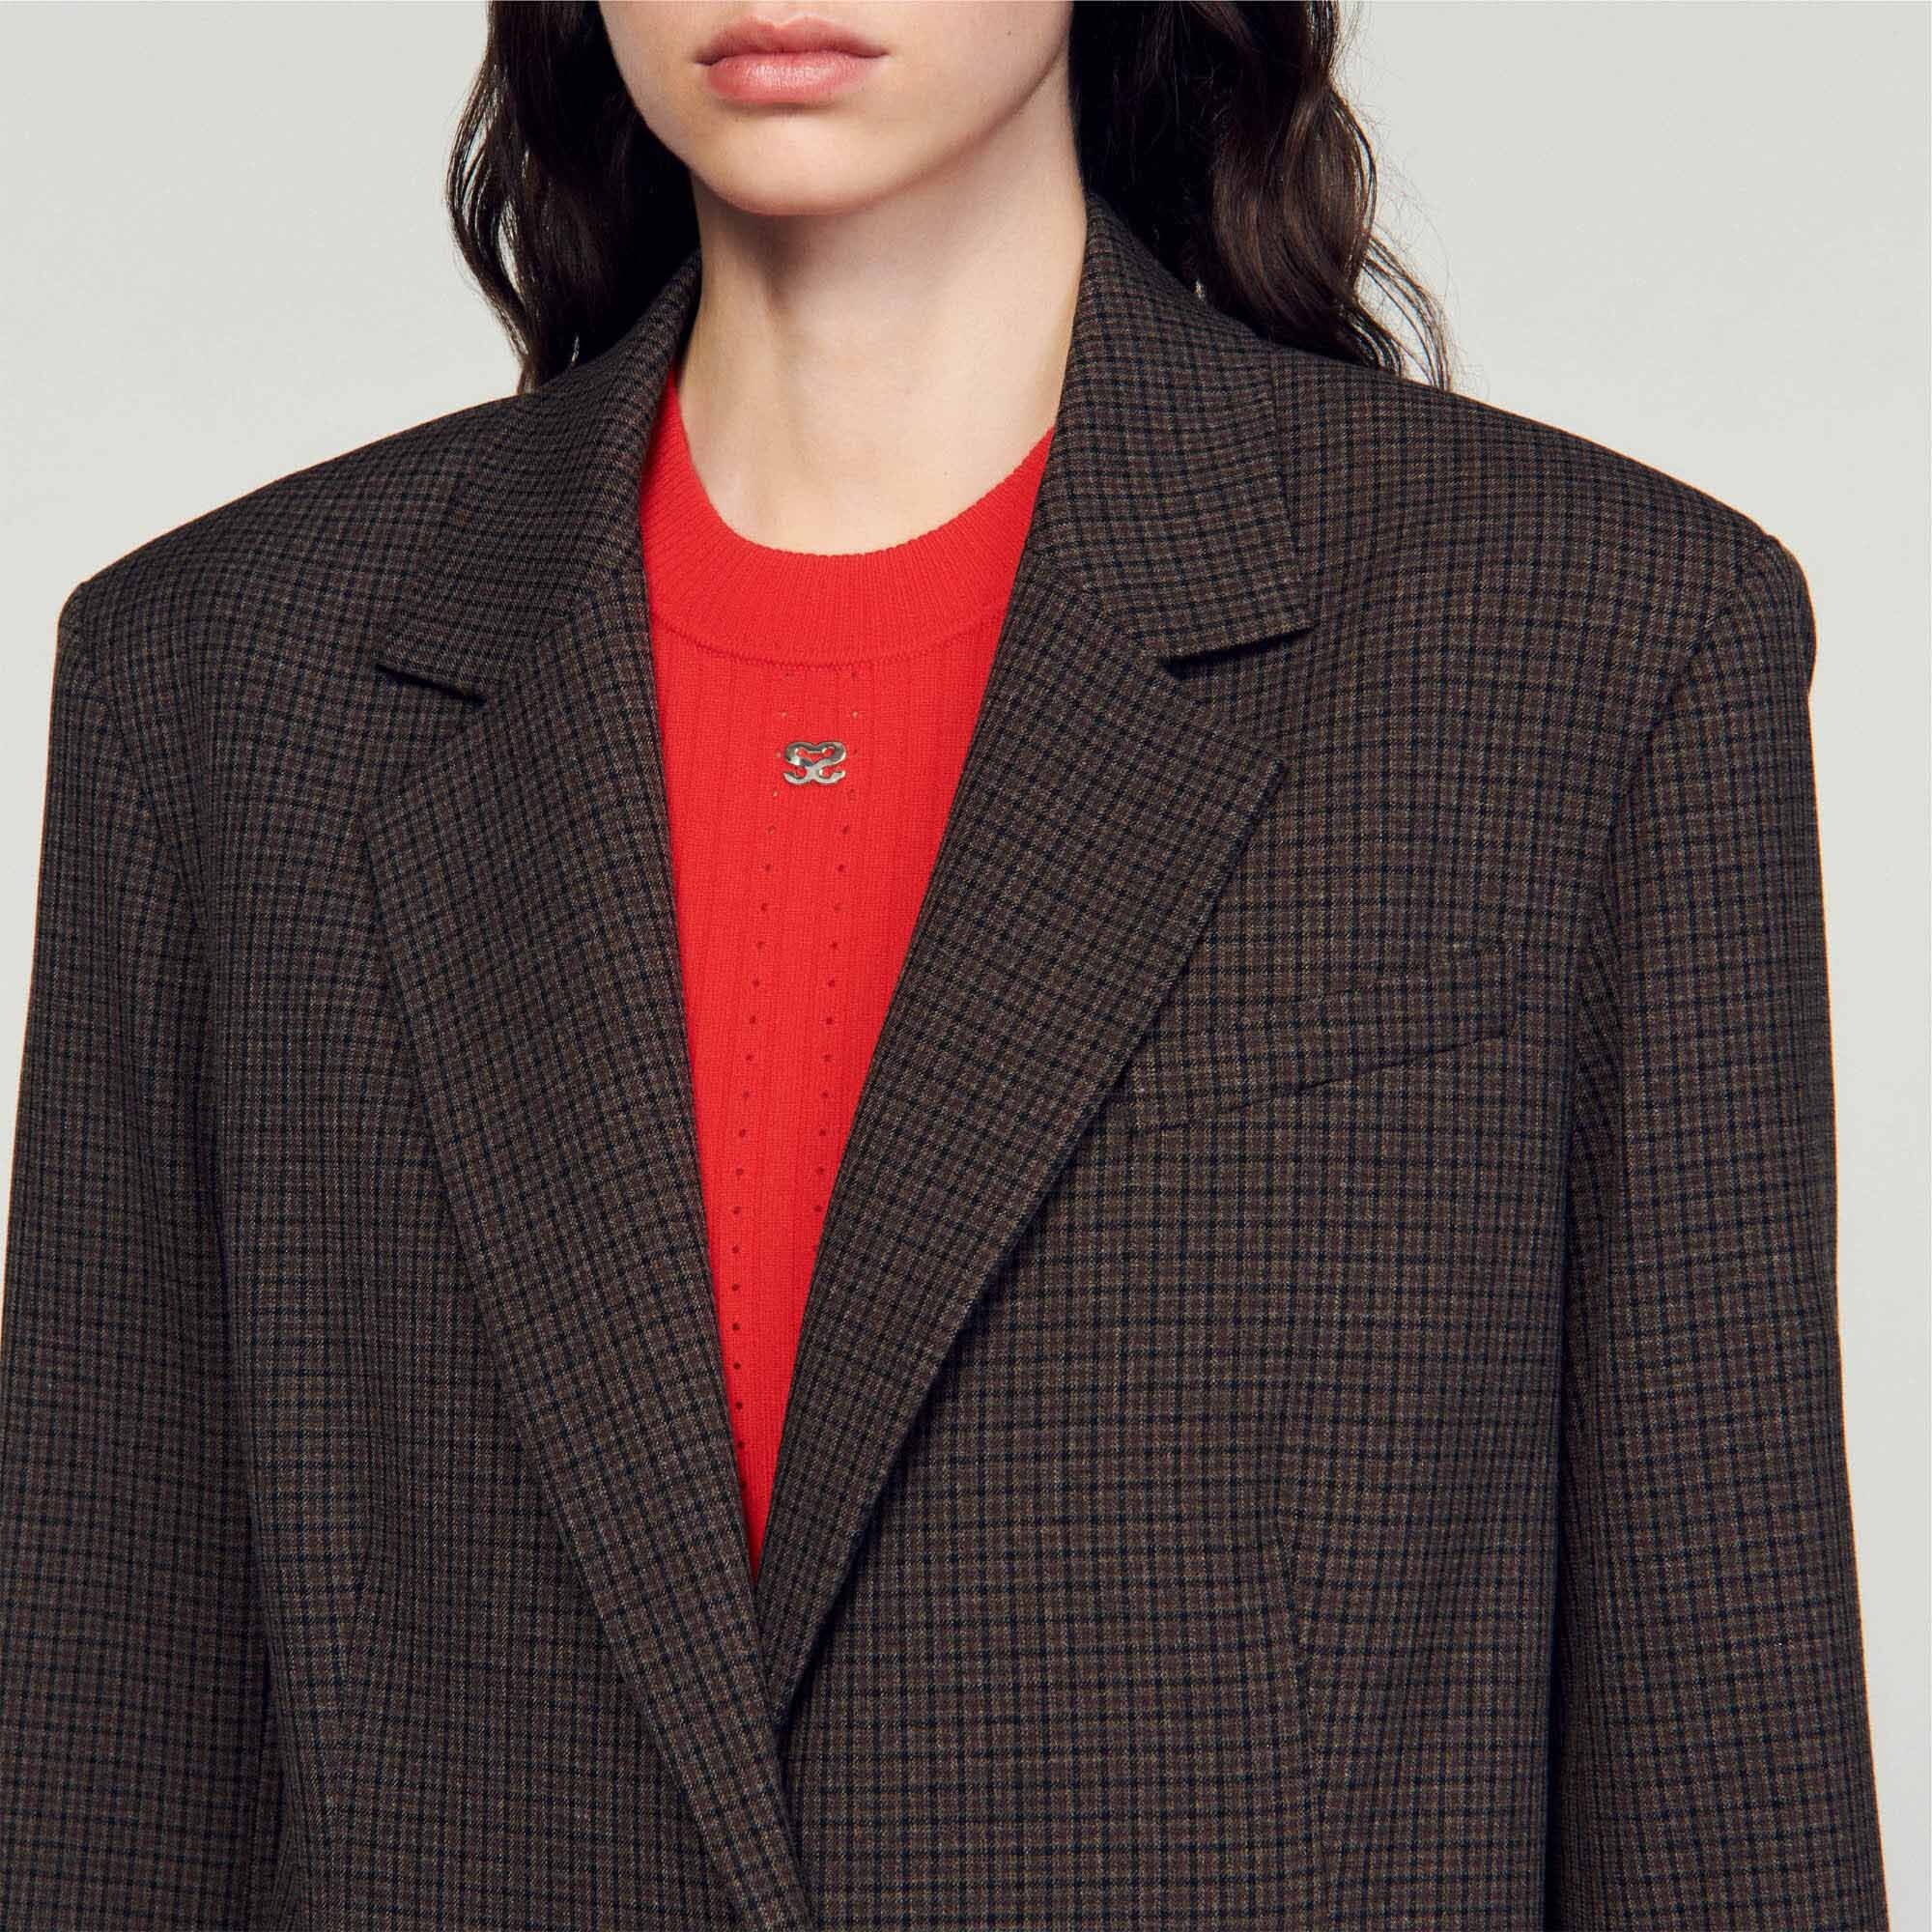 SUIT JACKET WITH SMALL CHECKS - 4